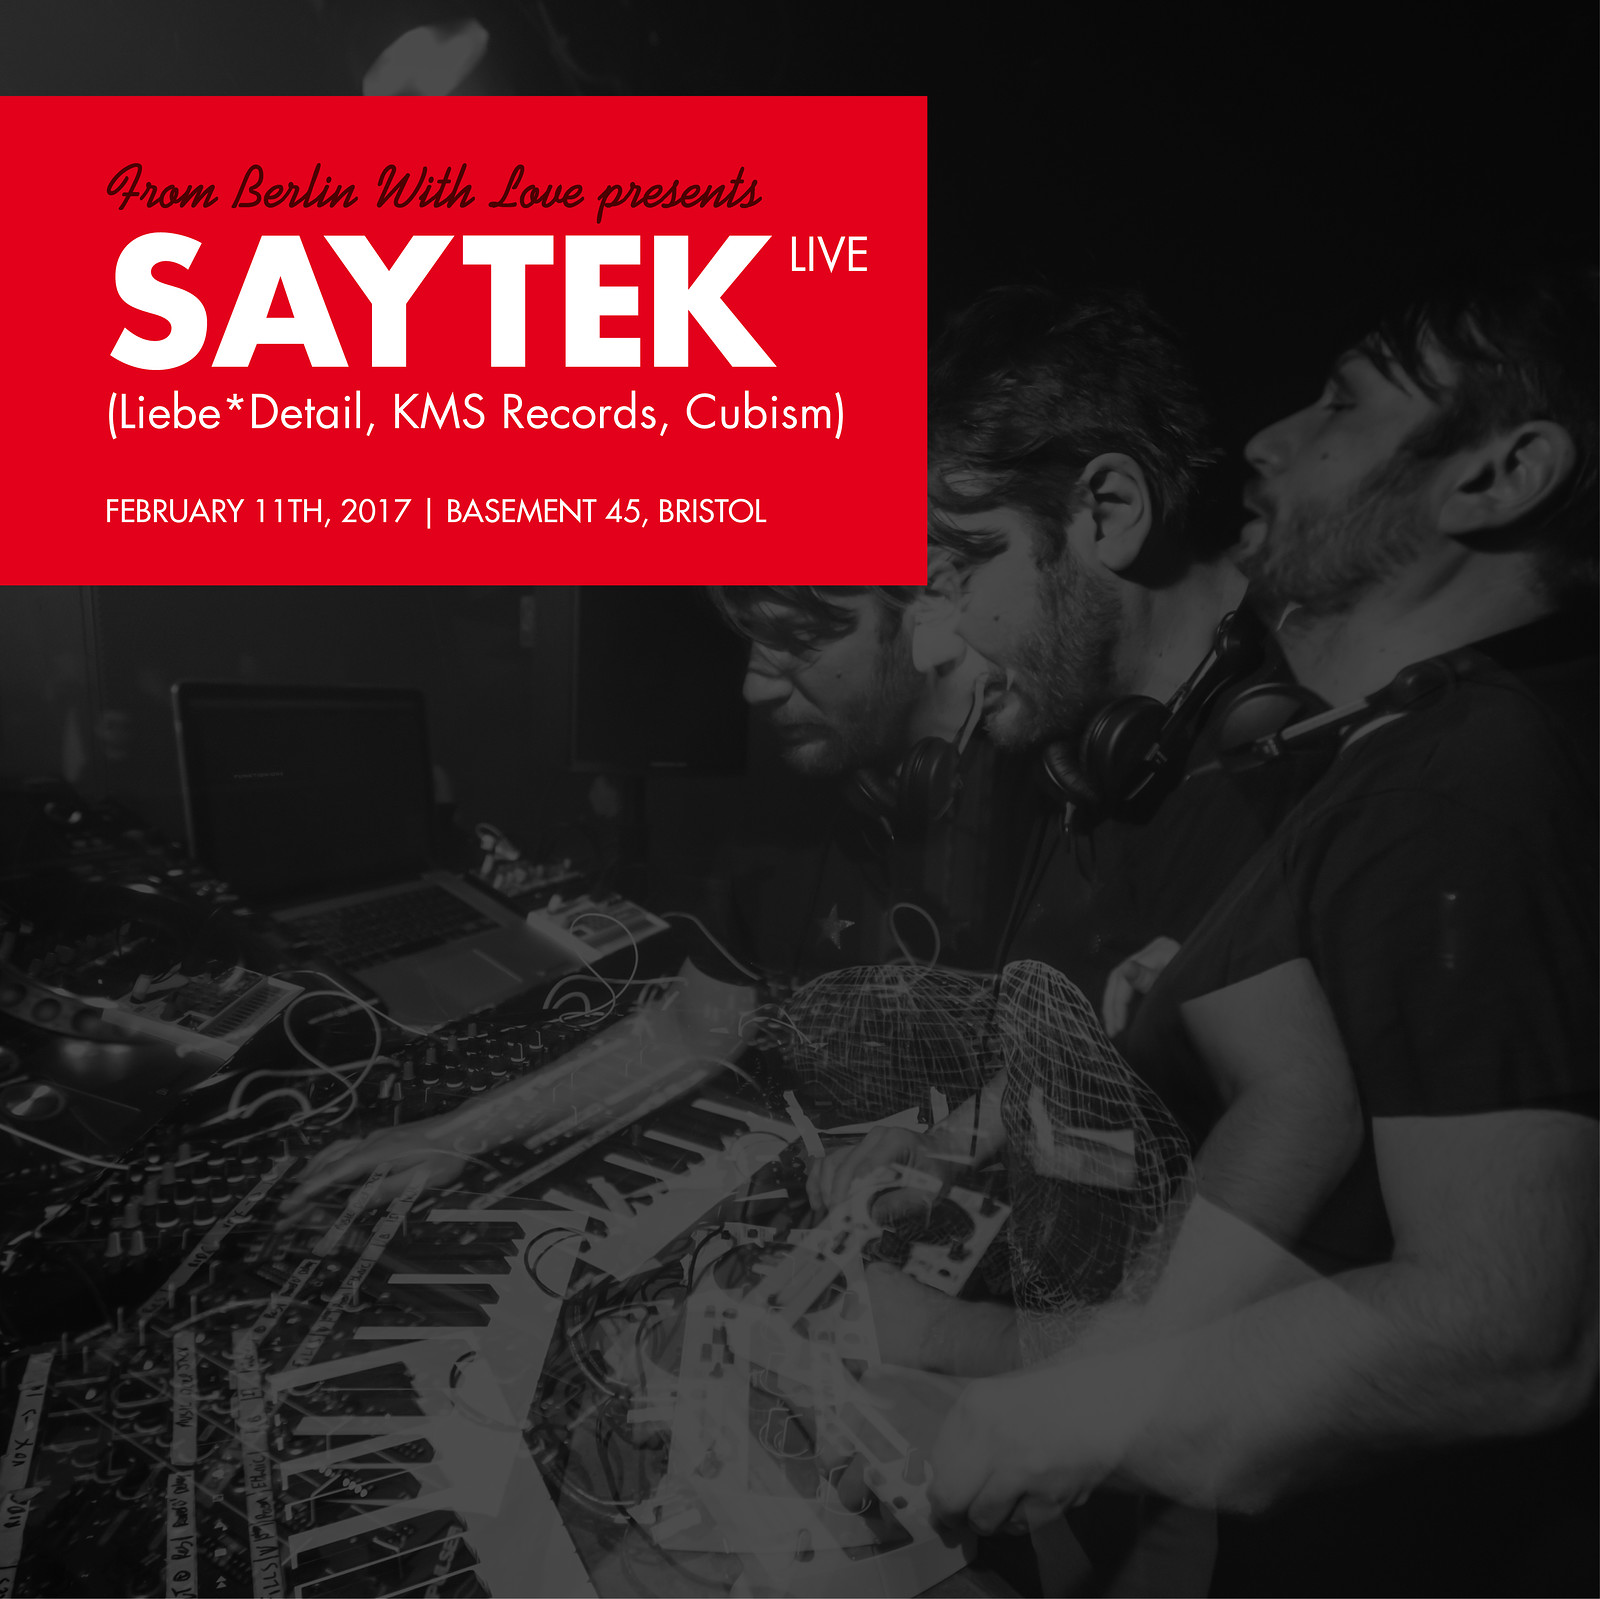 From Berlin with Love presents Saytek at Basement 45